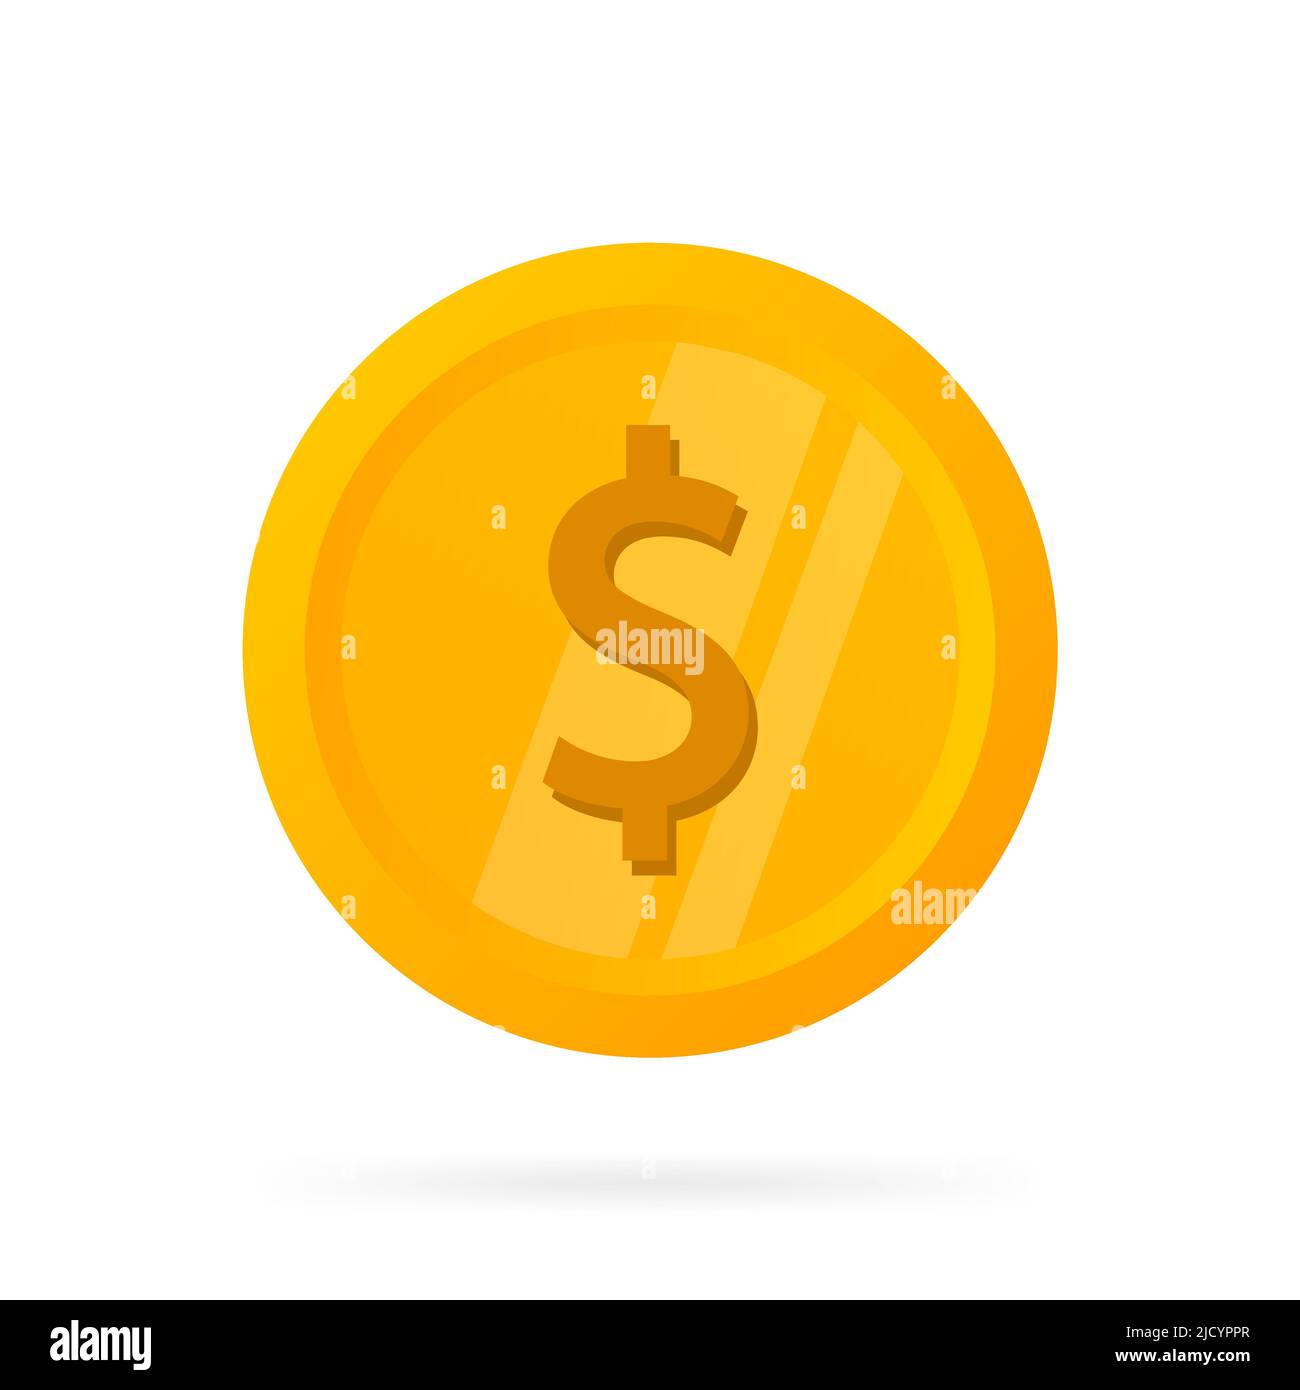 Dallar coin in front. Pile of gold coins vector illustration Stock Vector